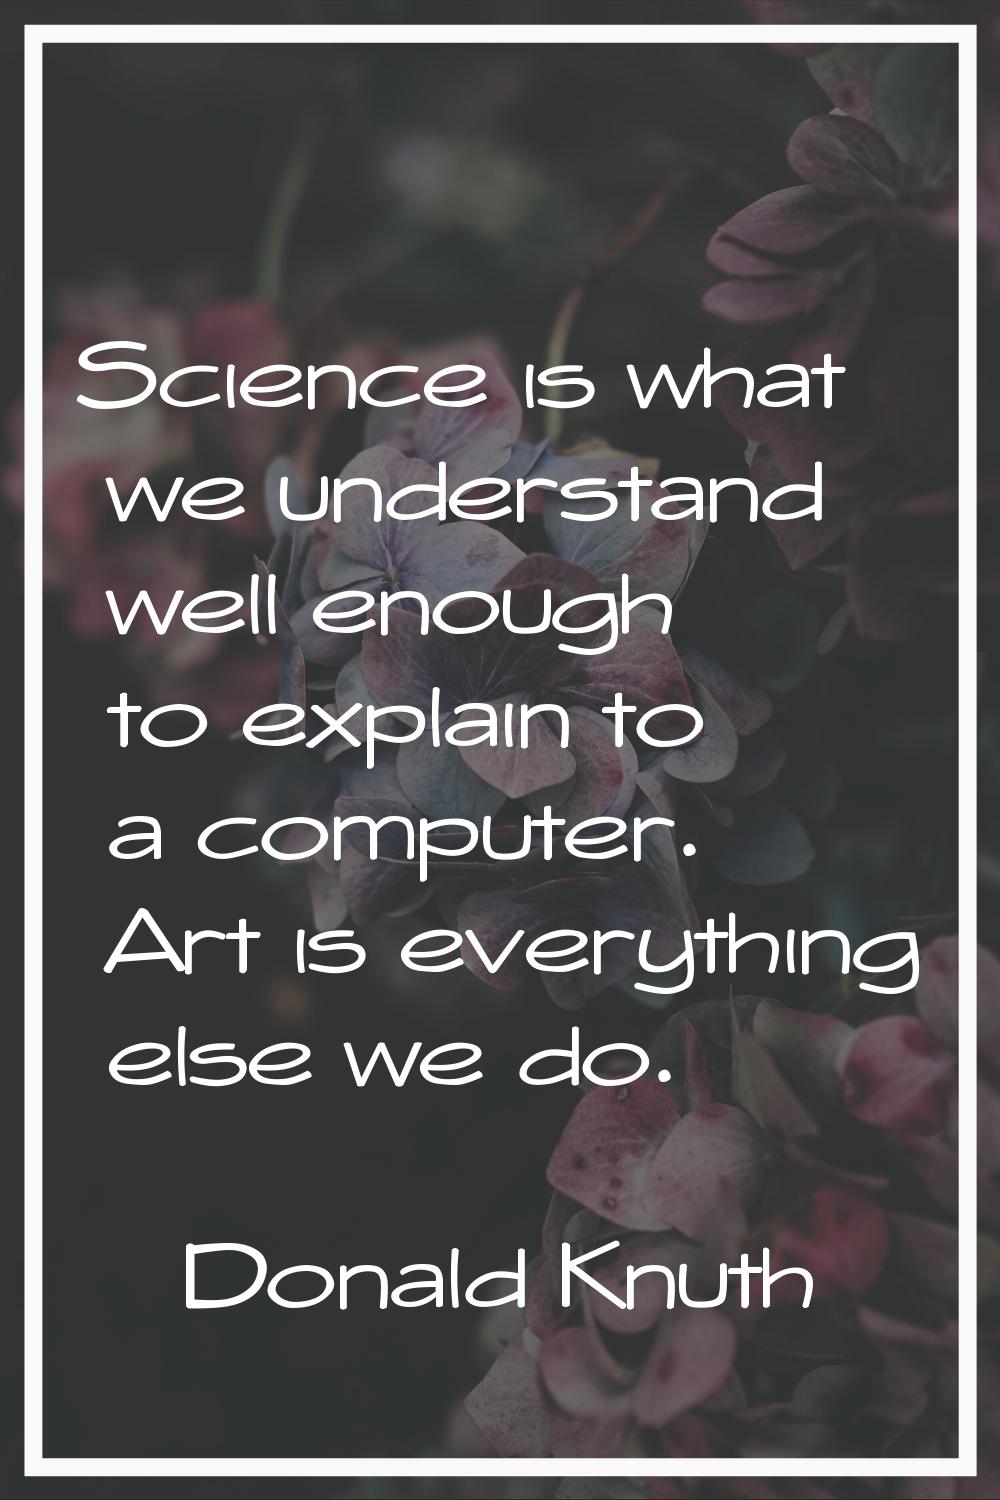 Science is what we understand well enough to explain to a computer. Art is everything else we do.